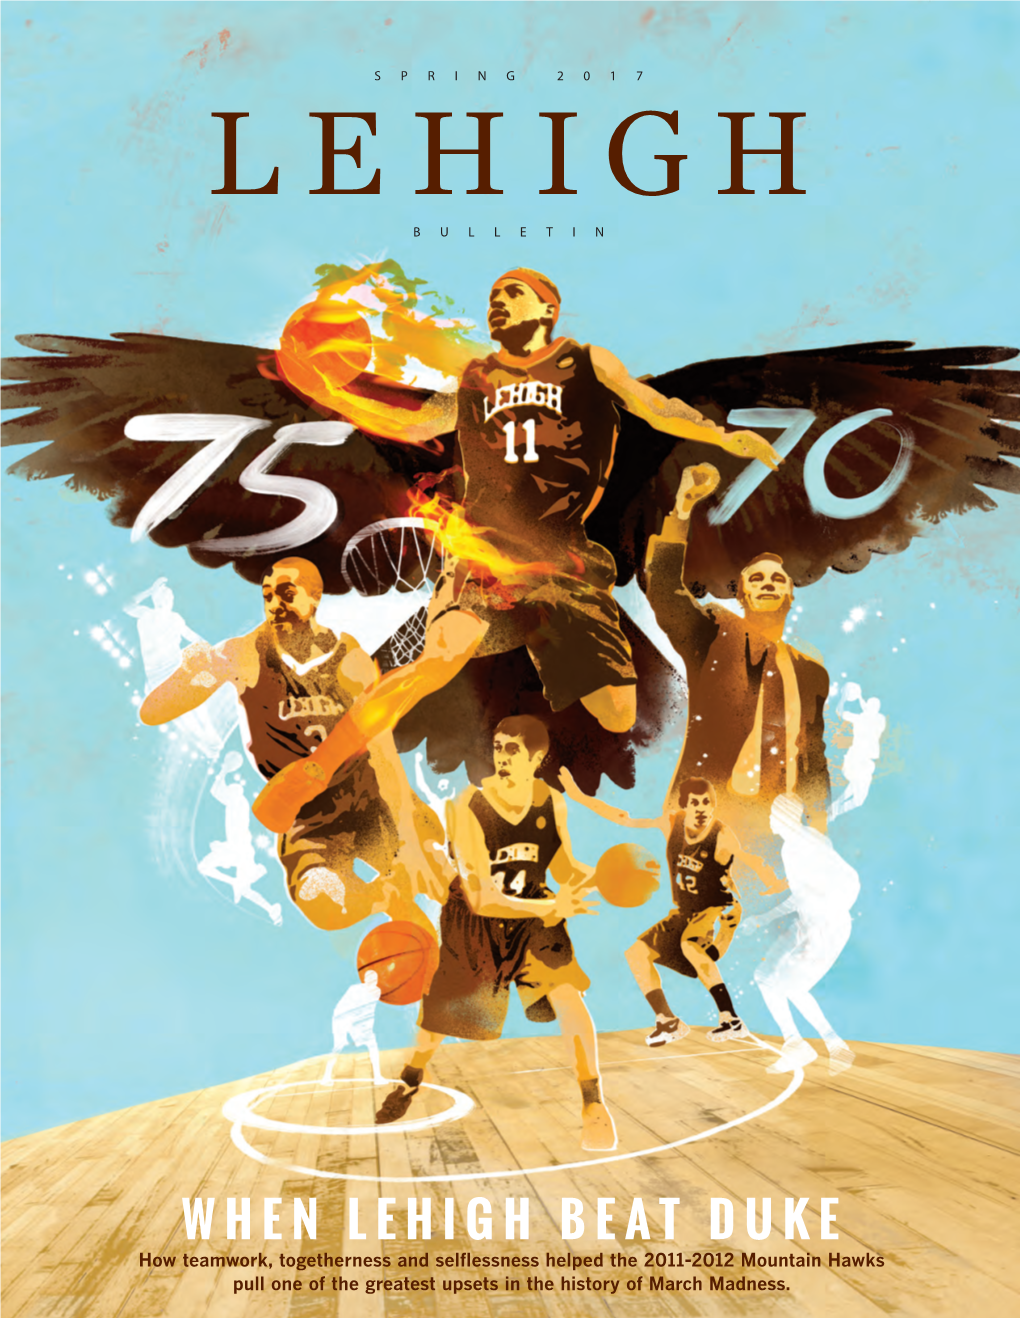 WHEN LEHIGH BEAT DUKE How Teamwork, Togetherness and Selflessness Helped the 2011-2012 Mountain Hawks Pull One of the Greatest Upsets in the History of March Madness